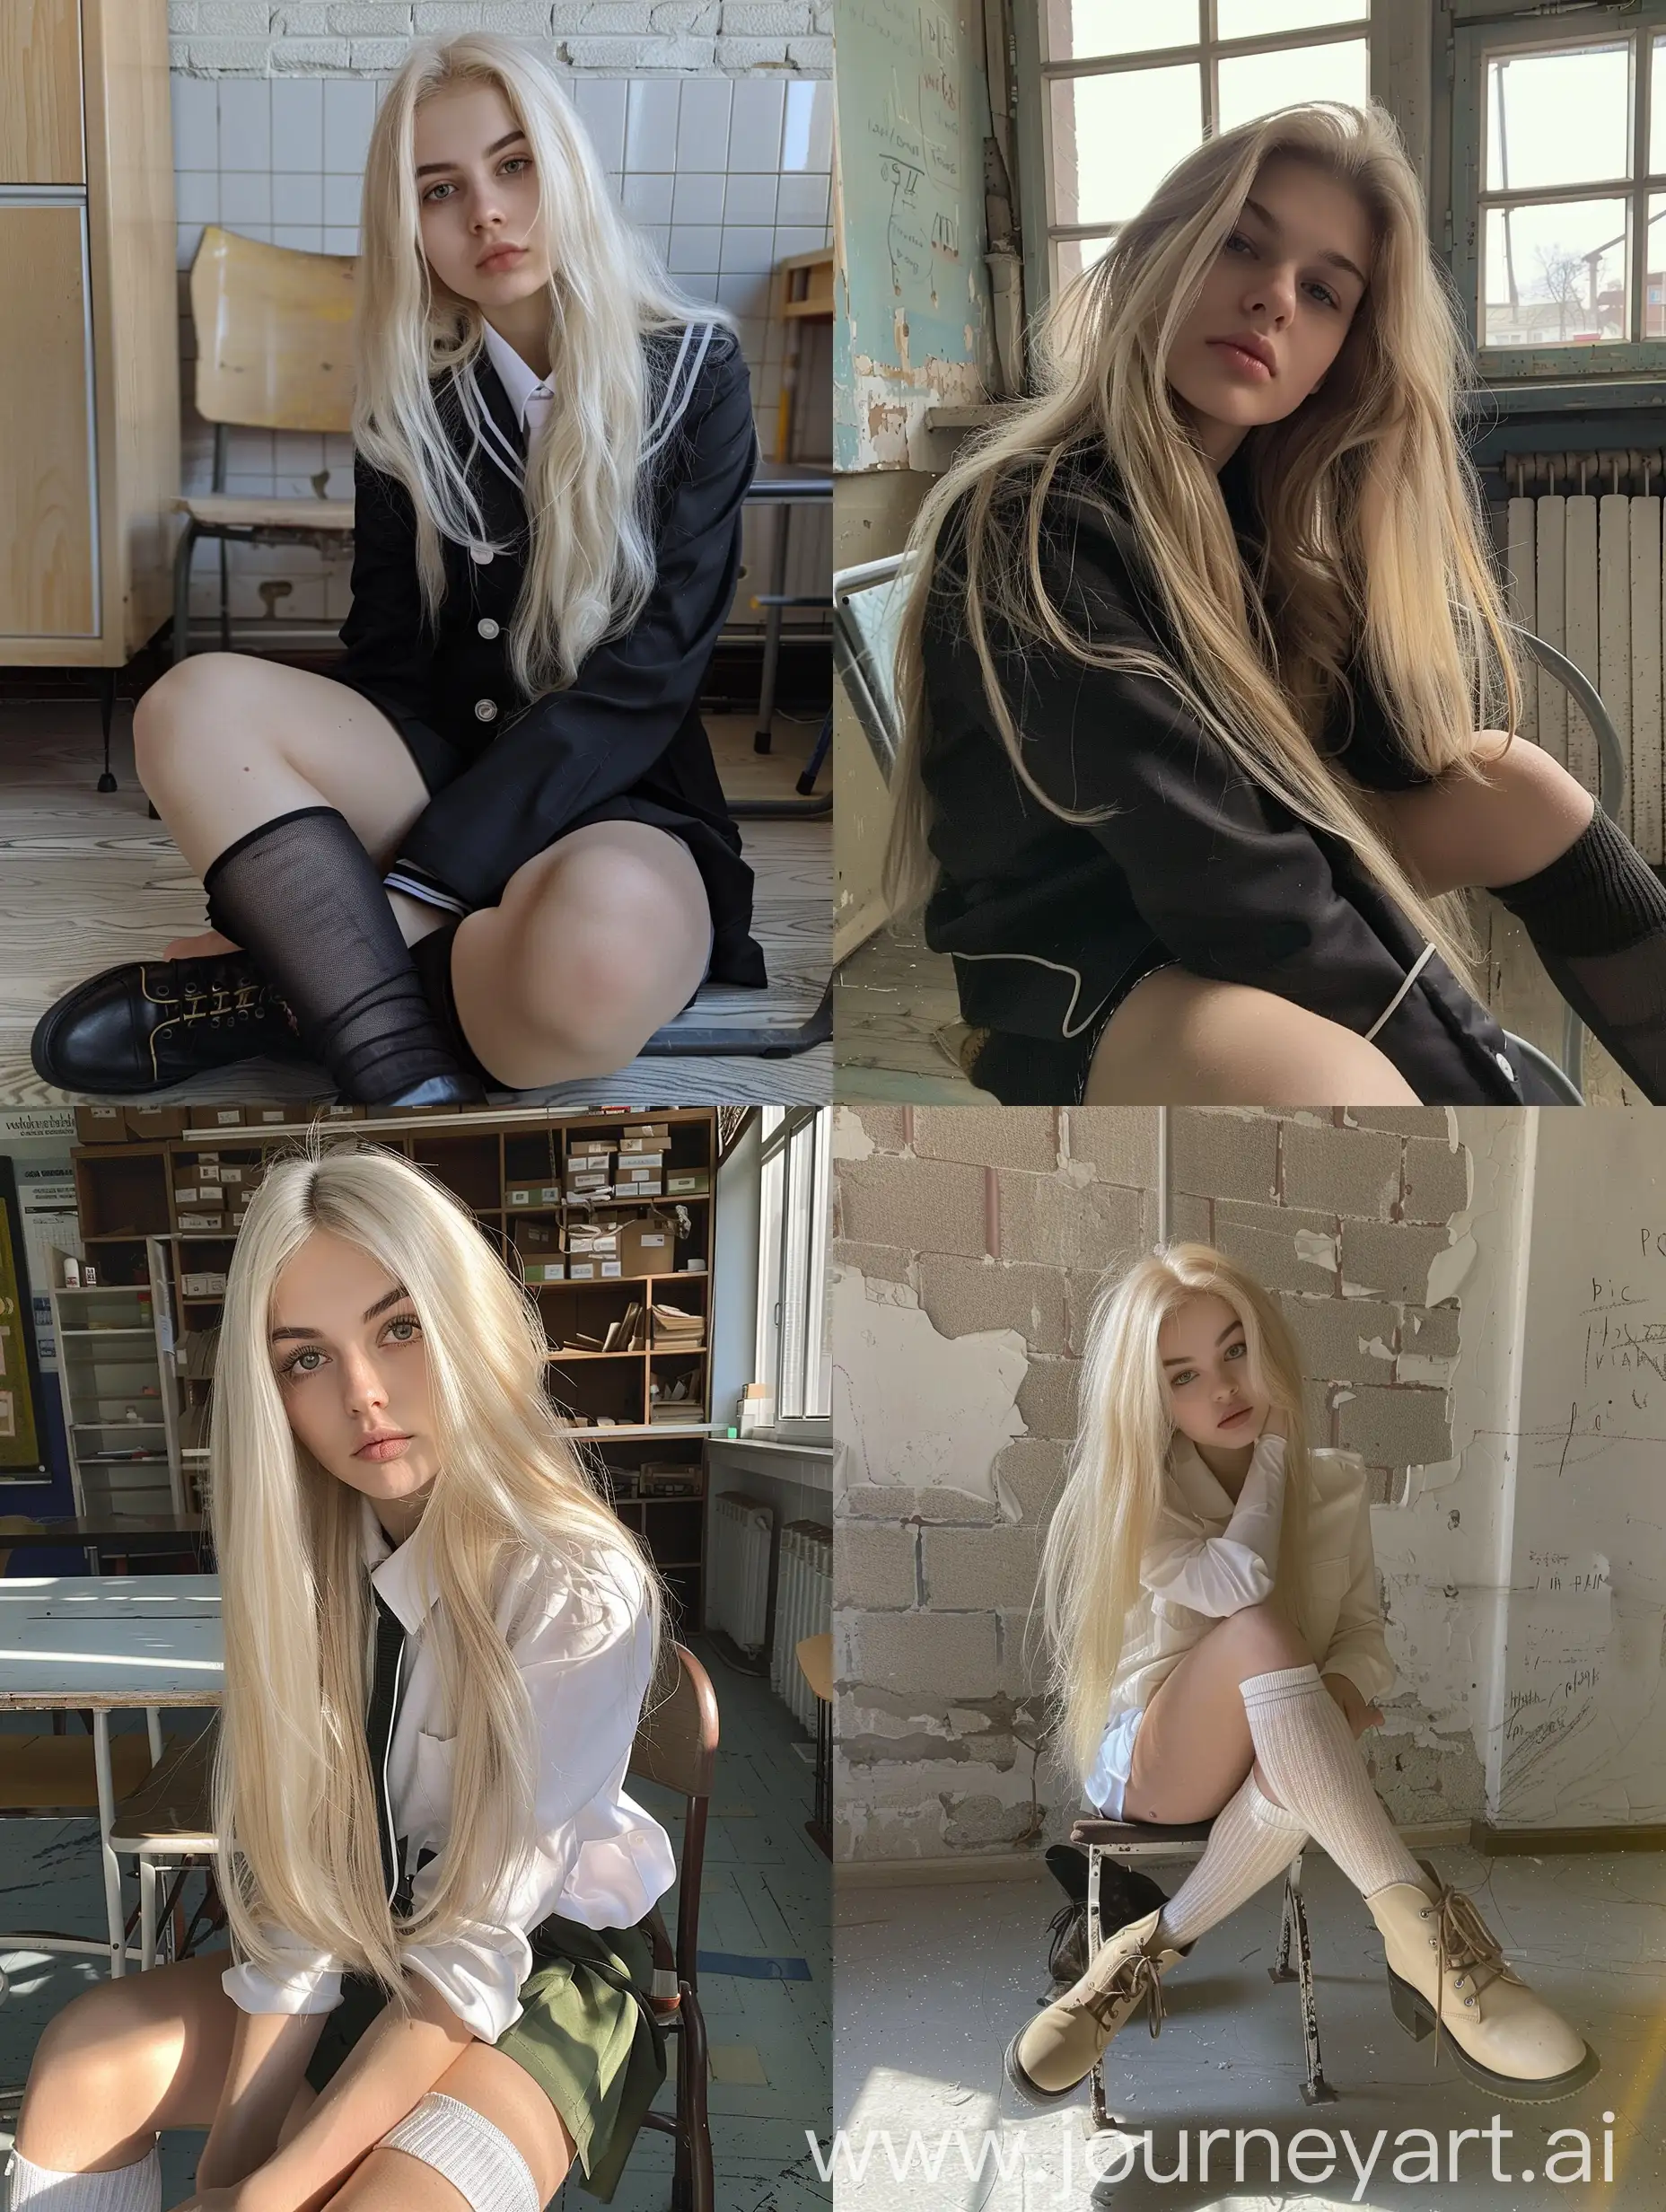 1 Ukrainian girl, long blond hair , 22 years old, influencer, beauty , in the school ,  school  uniform , makeup, floor view, sitting on chair , socks and boots, no effect, selfie , iphone selfie, no filters , iphone photo natural